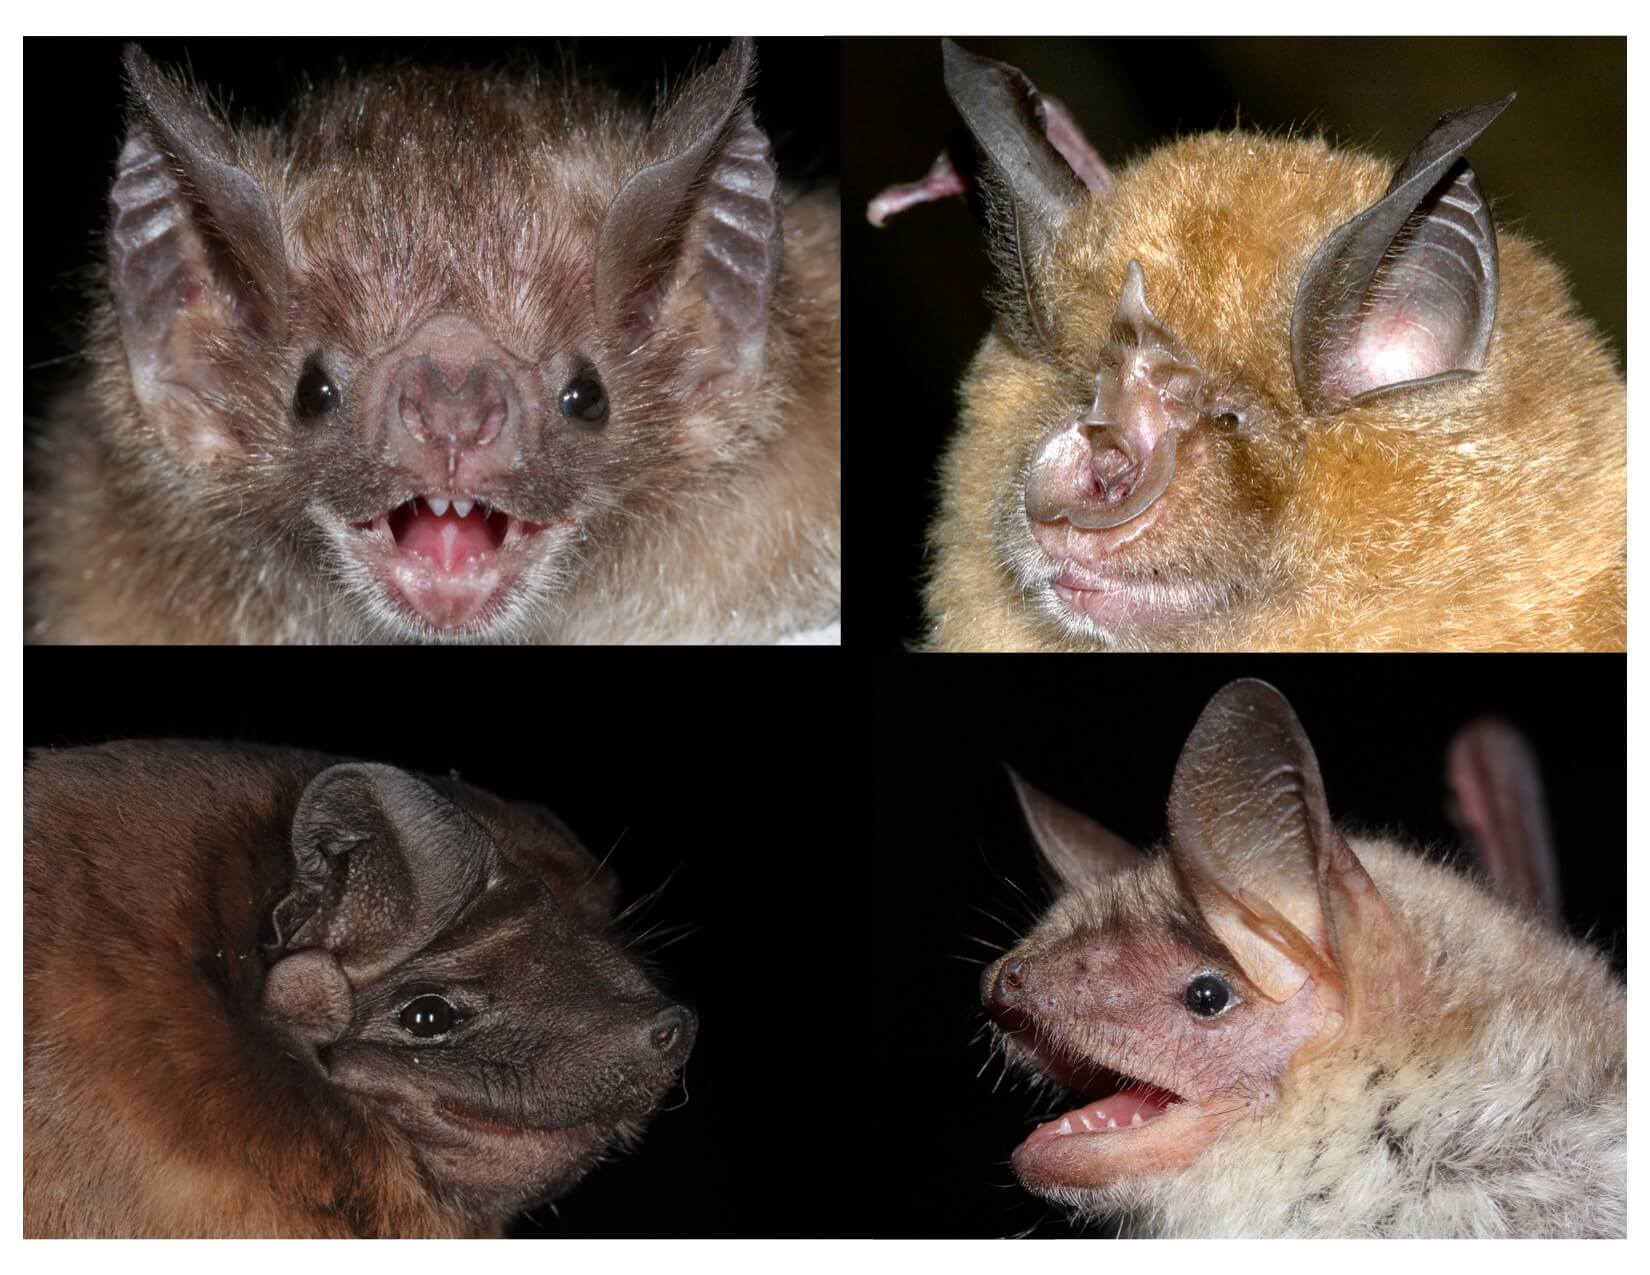 Many — but not all — bat species live exceptionally long lives. A new study hints at some of the genes that may be involved in natural longevity. Clockwise from top left, three long-lived bat species: the common vampire bat, greater horseshoe bat and the greater mouse-eared bat. Bottom left, the velvety free-tailed bat, a short-lived bat species. Photos courtesy of Gerald Wilkinson, Gareth Jones, Sebastien Puechmaille and Marco Tschapka.   